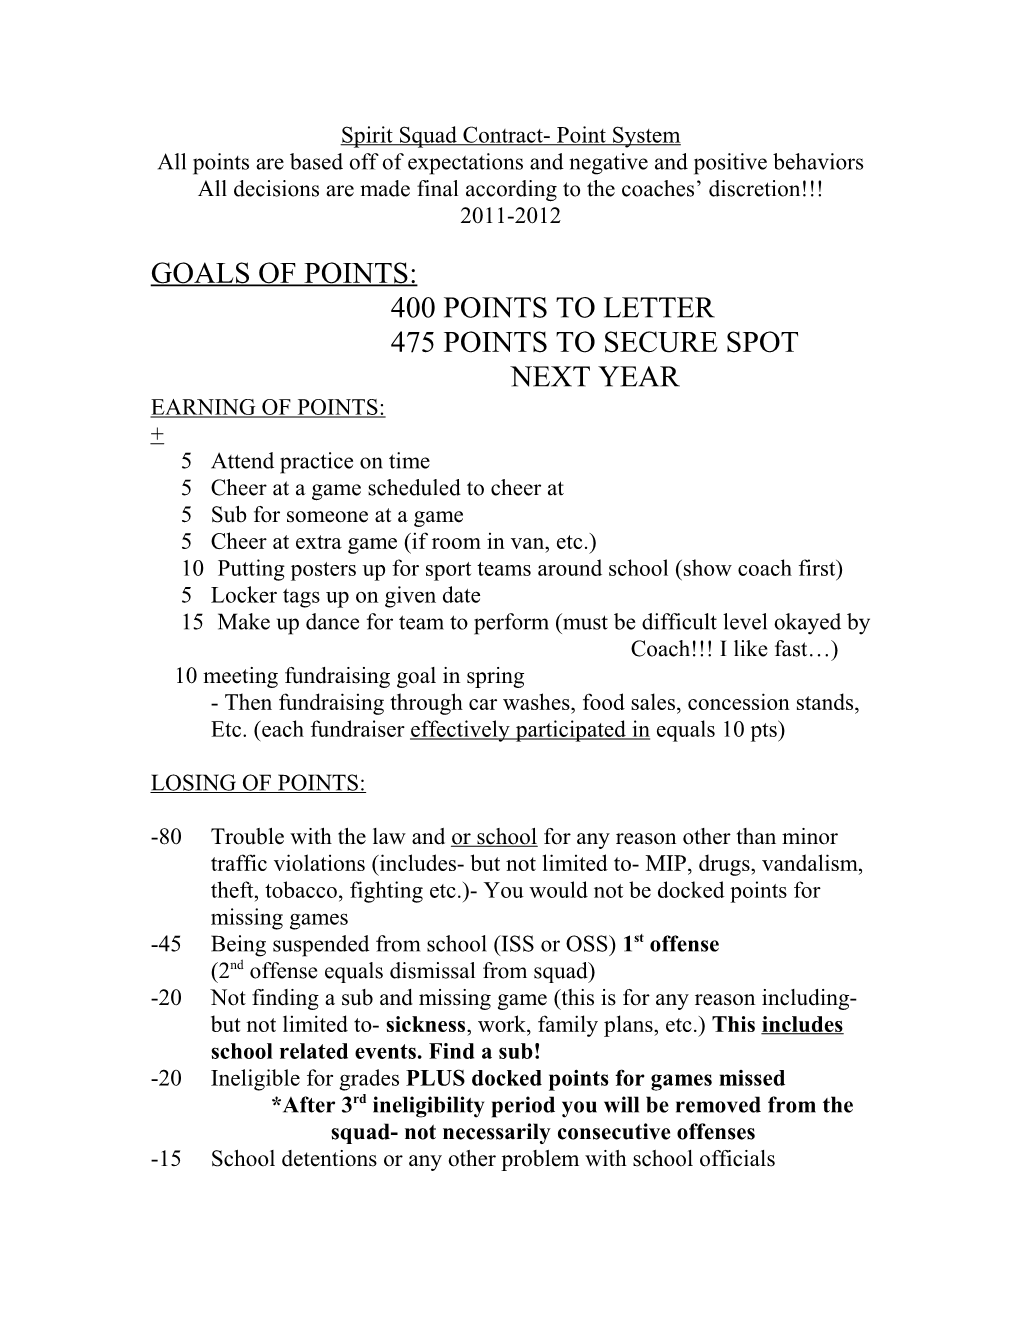 Spirit Squad Contract- Point System